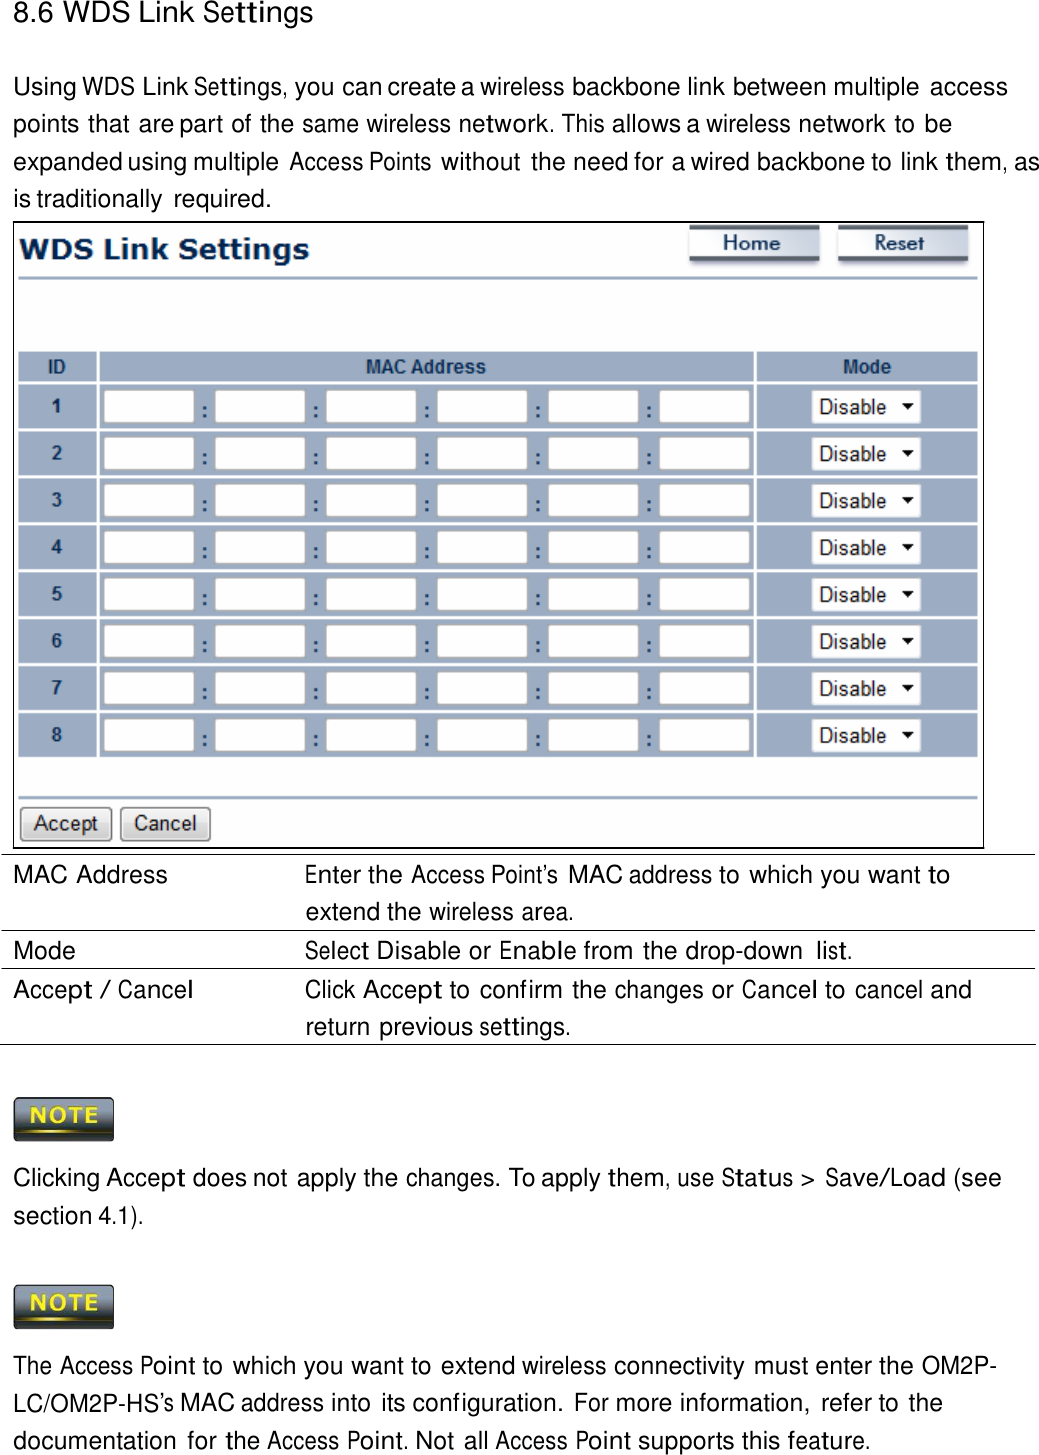 8.6 WDS Link Settings    Using WDS Link Settings, you can create a wireless backbone link between multiple access points that are part of the same wireless network. This allows a wireless network to be expanded using multiple Access Points without the need for a wired backbone to link them, as is traditionally required.                                MAC Address  Enter the Access Point’s MAC address to which you want to extend the wireless area. Mode  Select Disable or Enable from the drop-down list. Accept / Cancel Click Accept to confirm the changes or Cancel to cancel and return previous settings.      Clicking Accept does not apply the changes. To apply them, use Status &gt; Save/Load (see section 4.1).      The Access Point to which you want to extend wireless connectivity must enter the OM2P-LC/OM2P-HS’s MAC address into its configuration. For more information,  refer to the documentation for the Access Point. Not all Access Point supports this feature. 